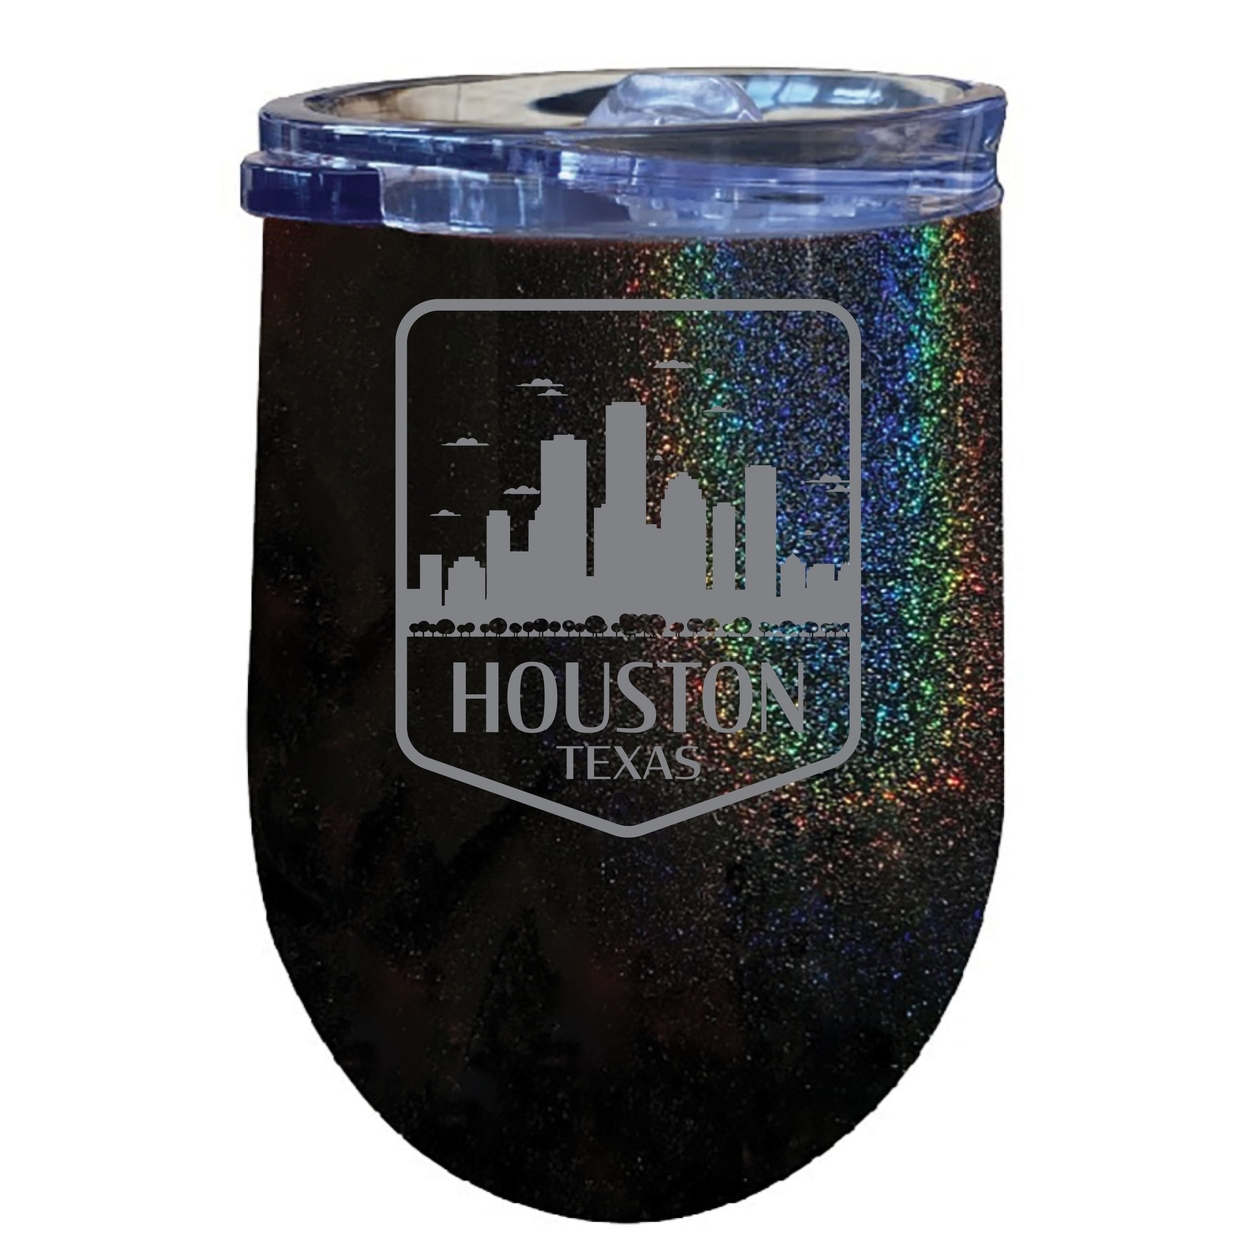 Houston Texas Souvenir 12 Oz Engraved Insulated Wine Stainless Steel Tumbler - Rose Gold,,4-Pack